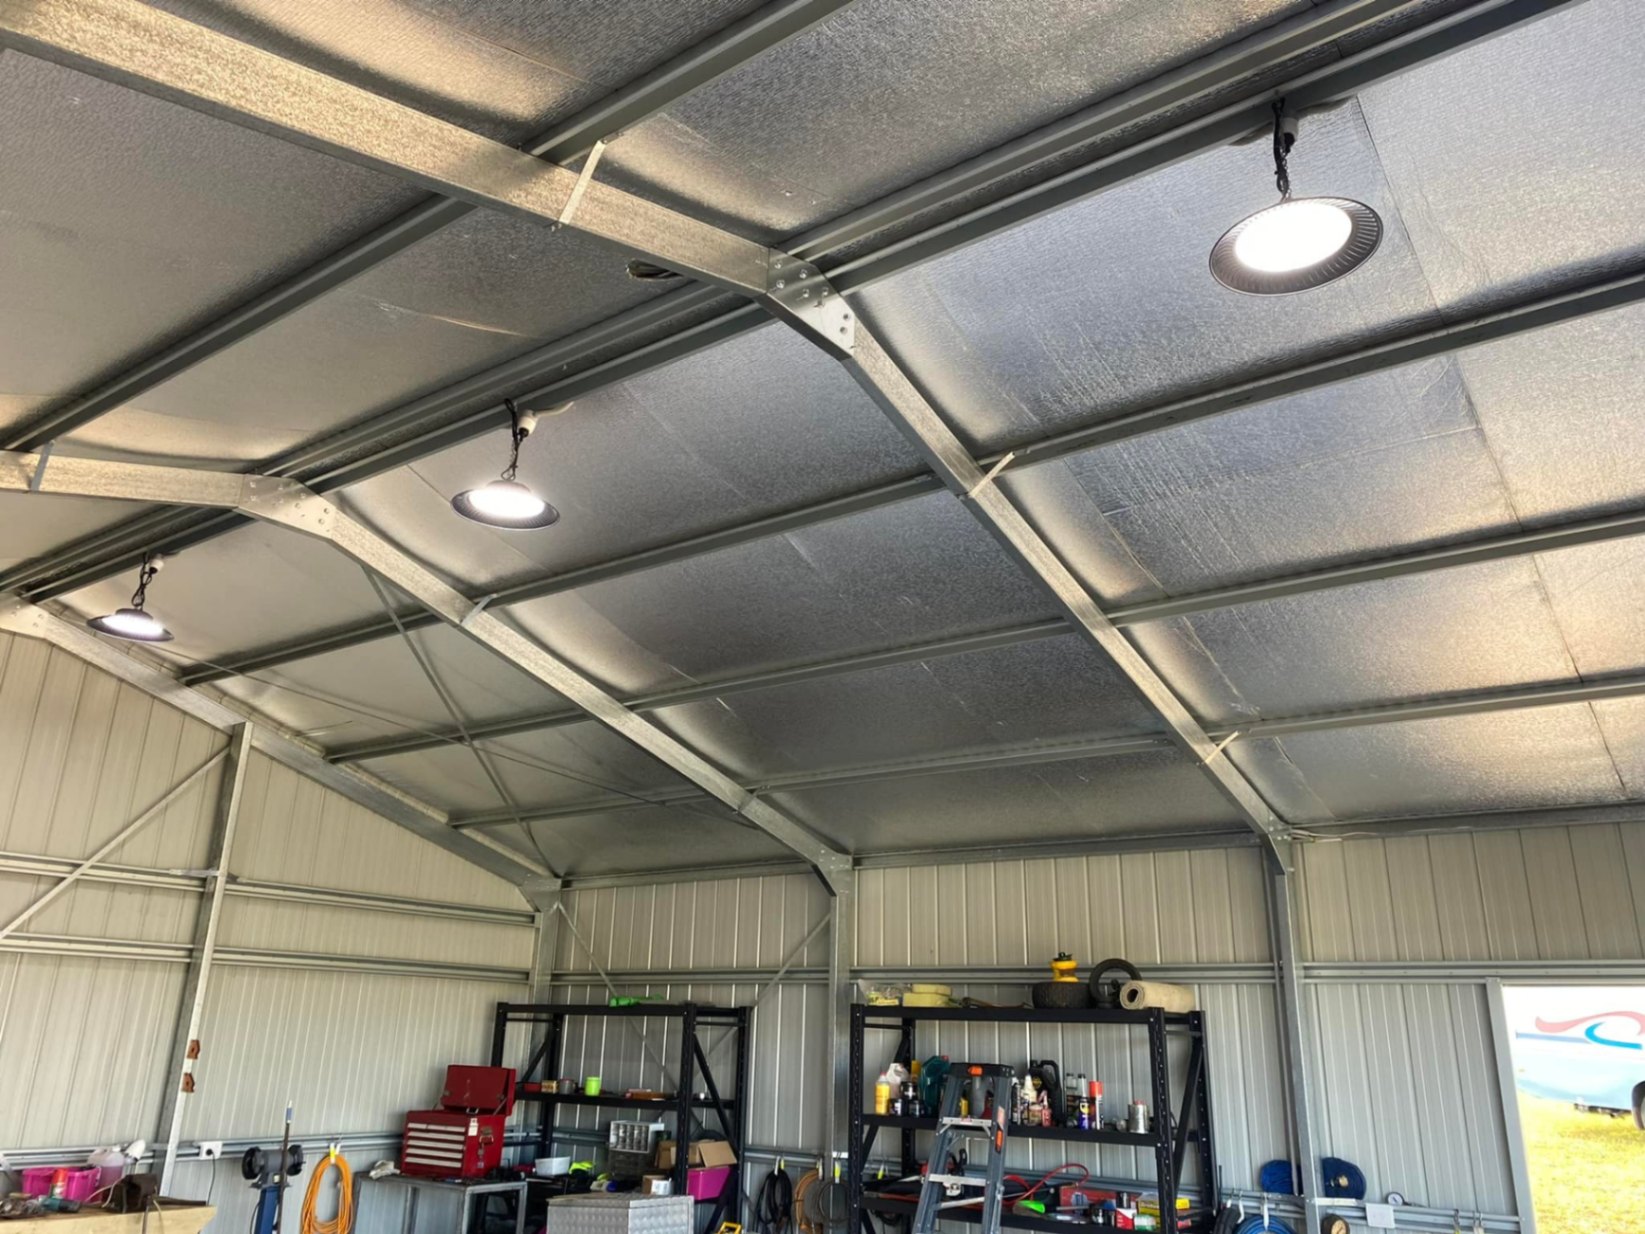 Shed Lighting installation - overhead lighting installed with shed wiring